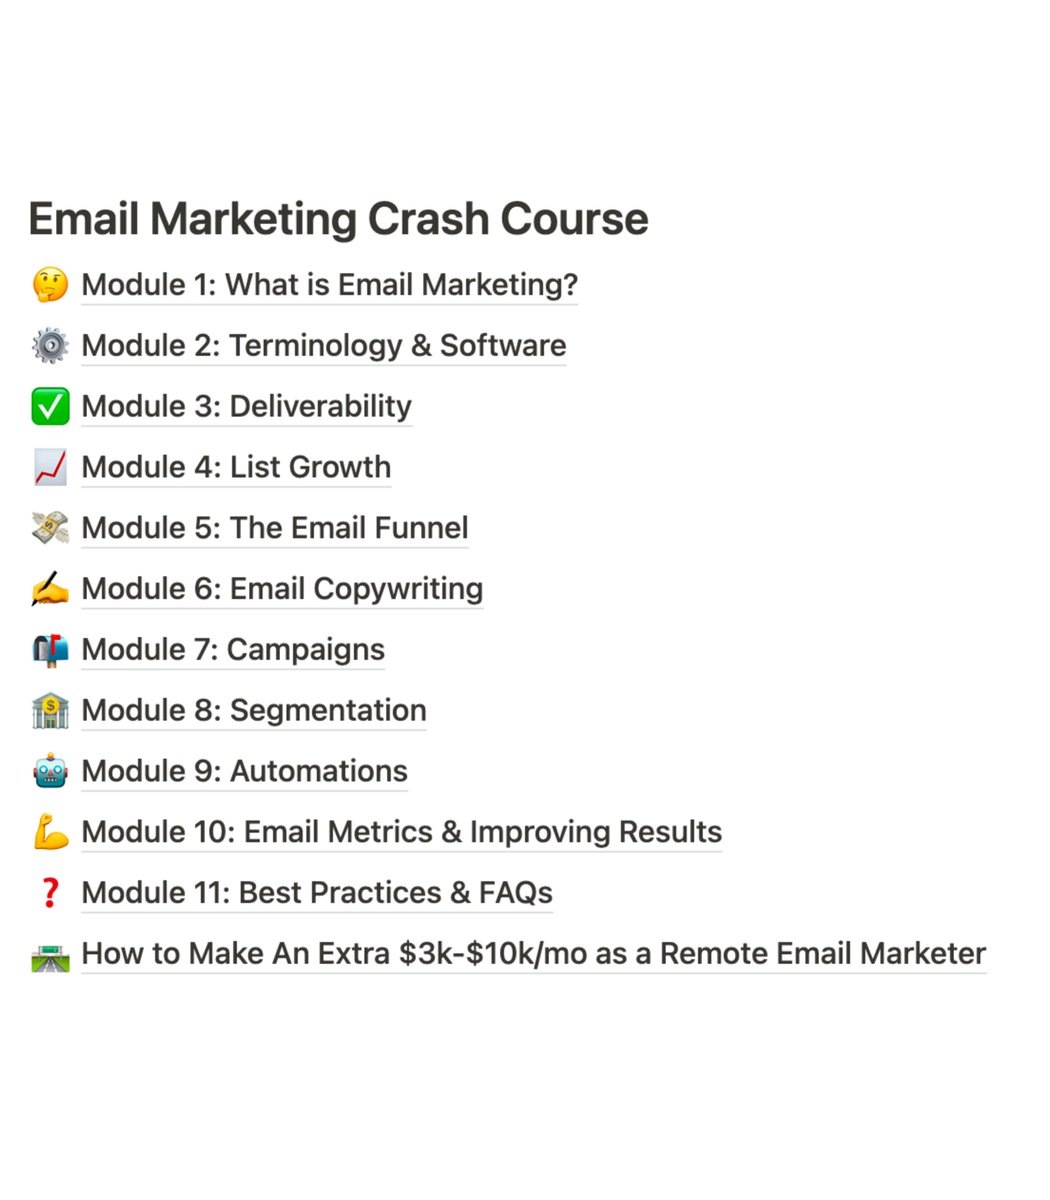 I could charge $297 for this...

But I'm giving it away for FREE.

Get my Email Marketing Crash Course:

- deliverability
- copywriting
- campaigns
- segmentation
- automations
- and much more

Just:

👉 like this
👉 comment “send”

(Must be following or I won't DM you)